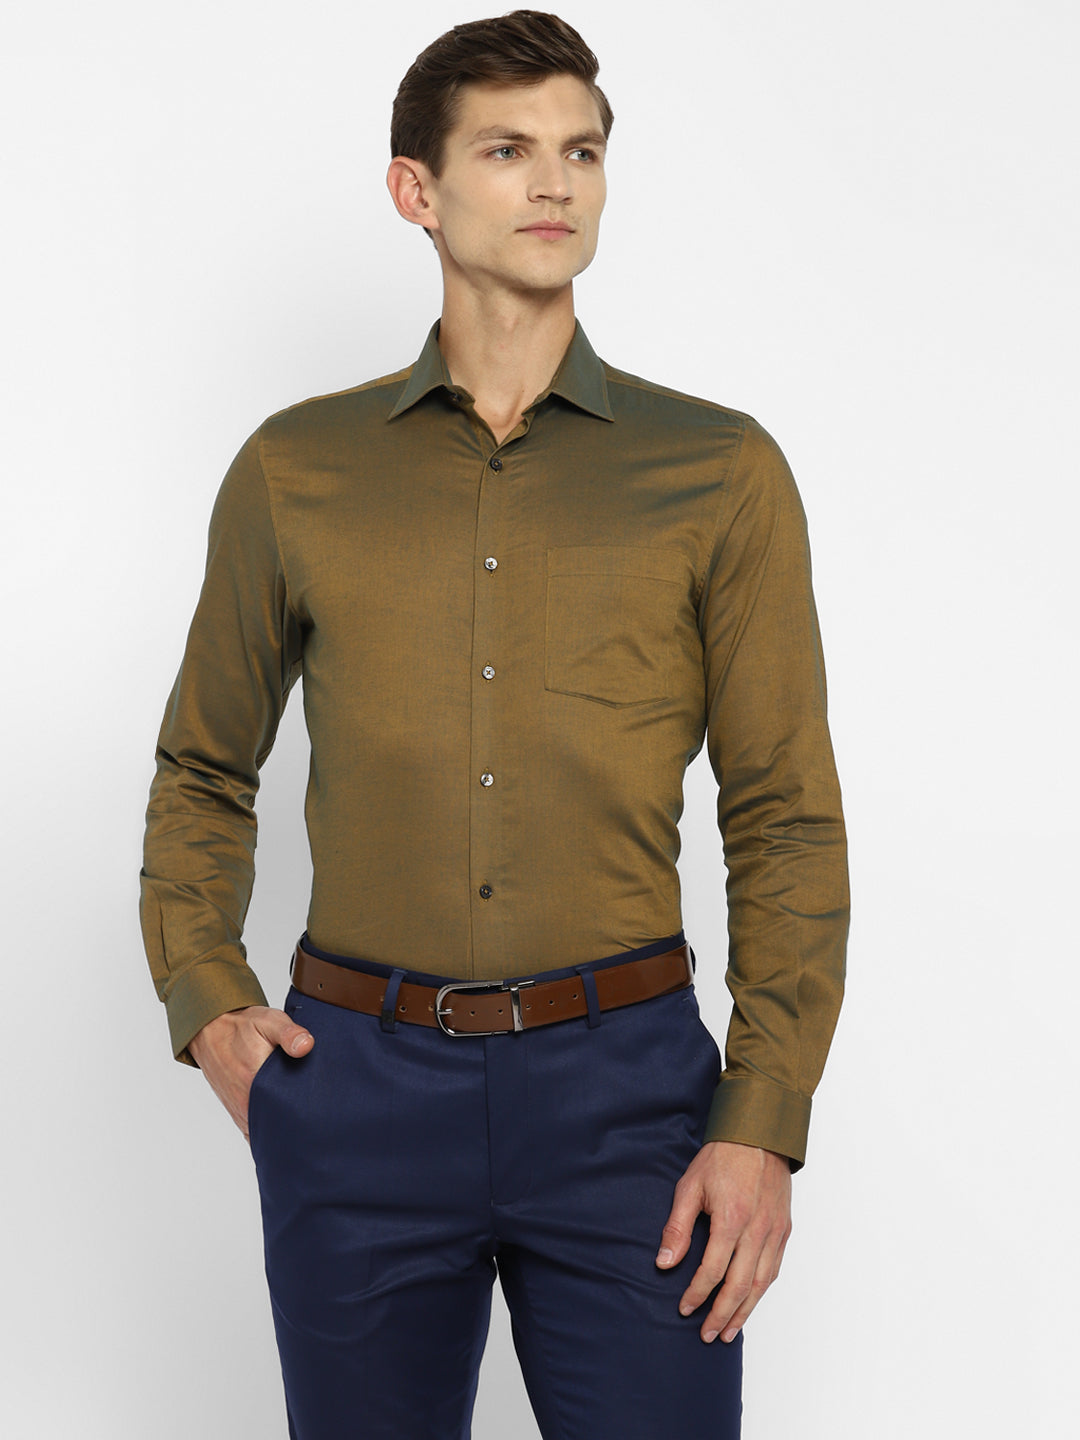 Olive Cotton Solid Slim Fit Shirts